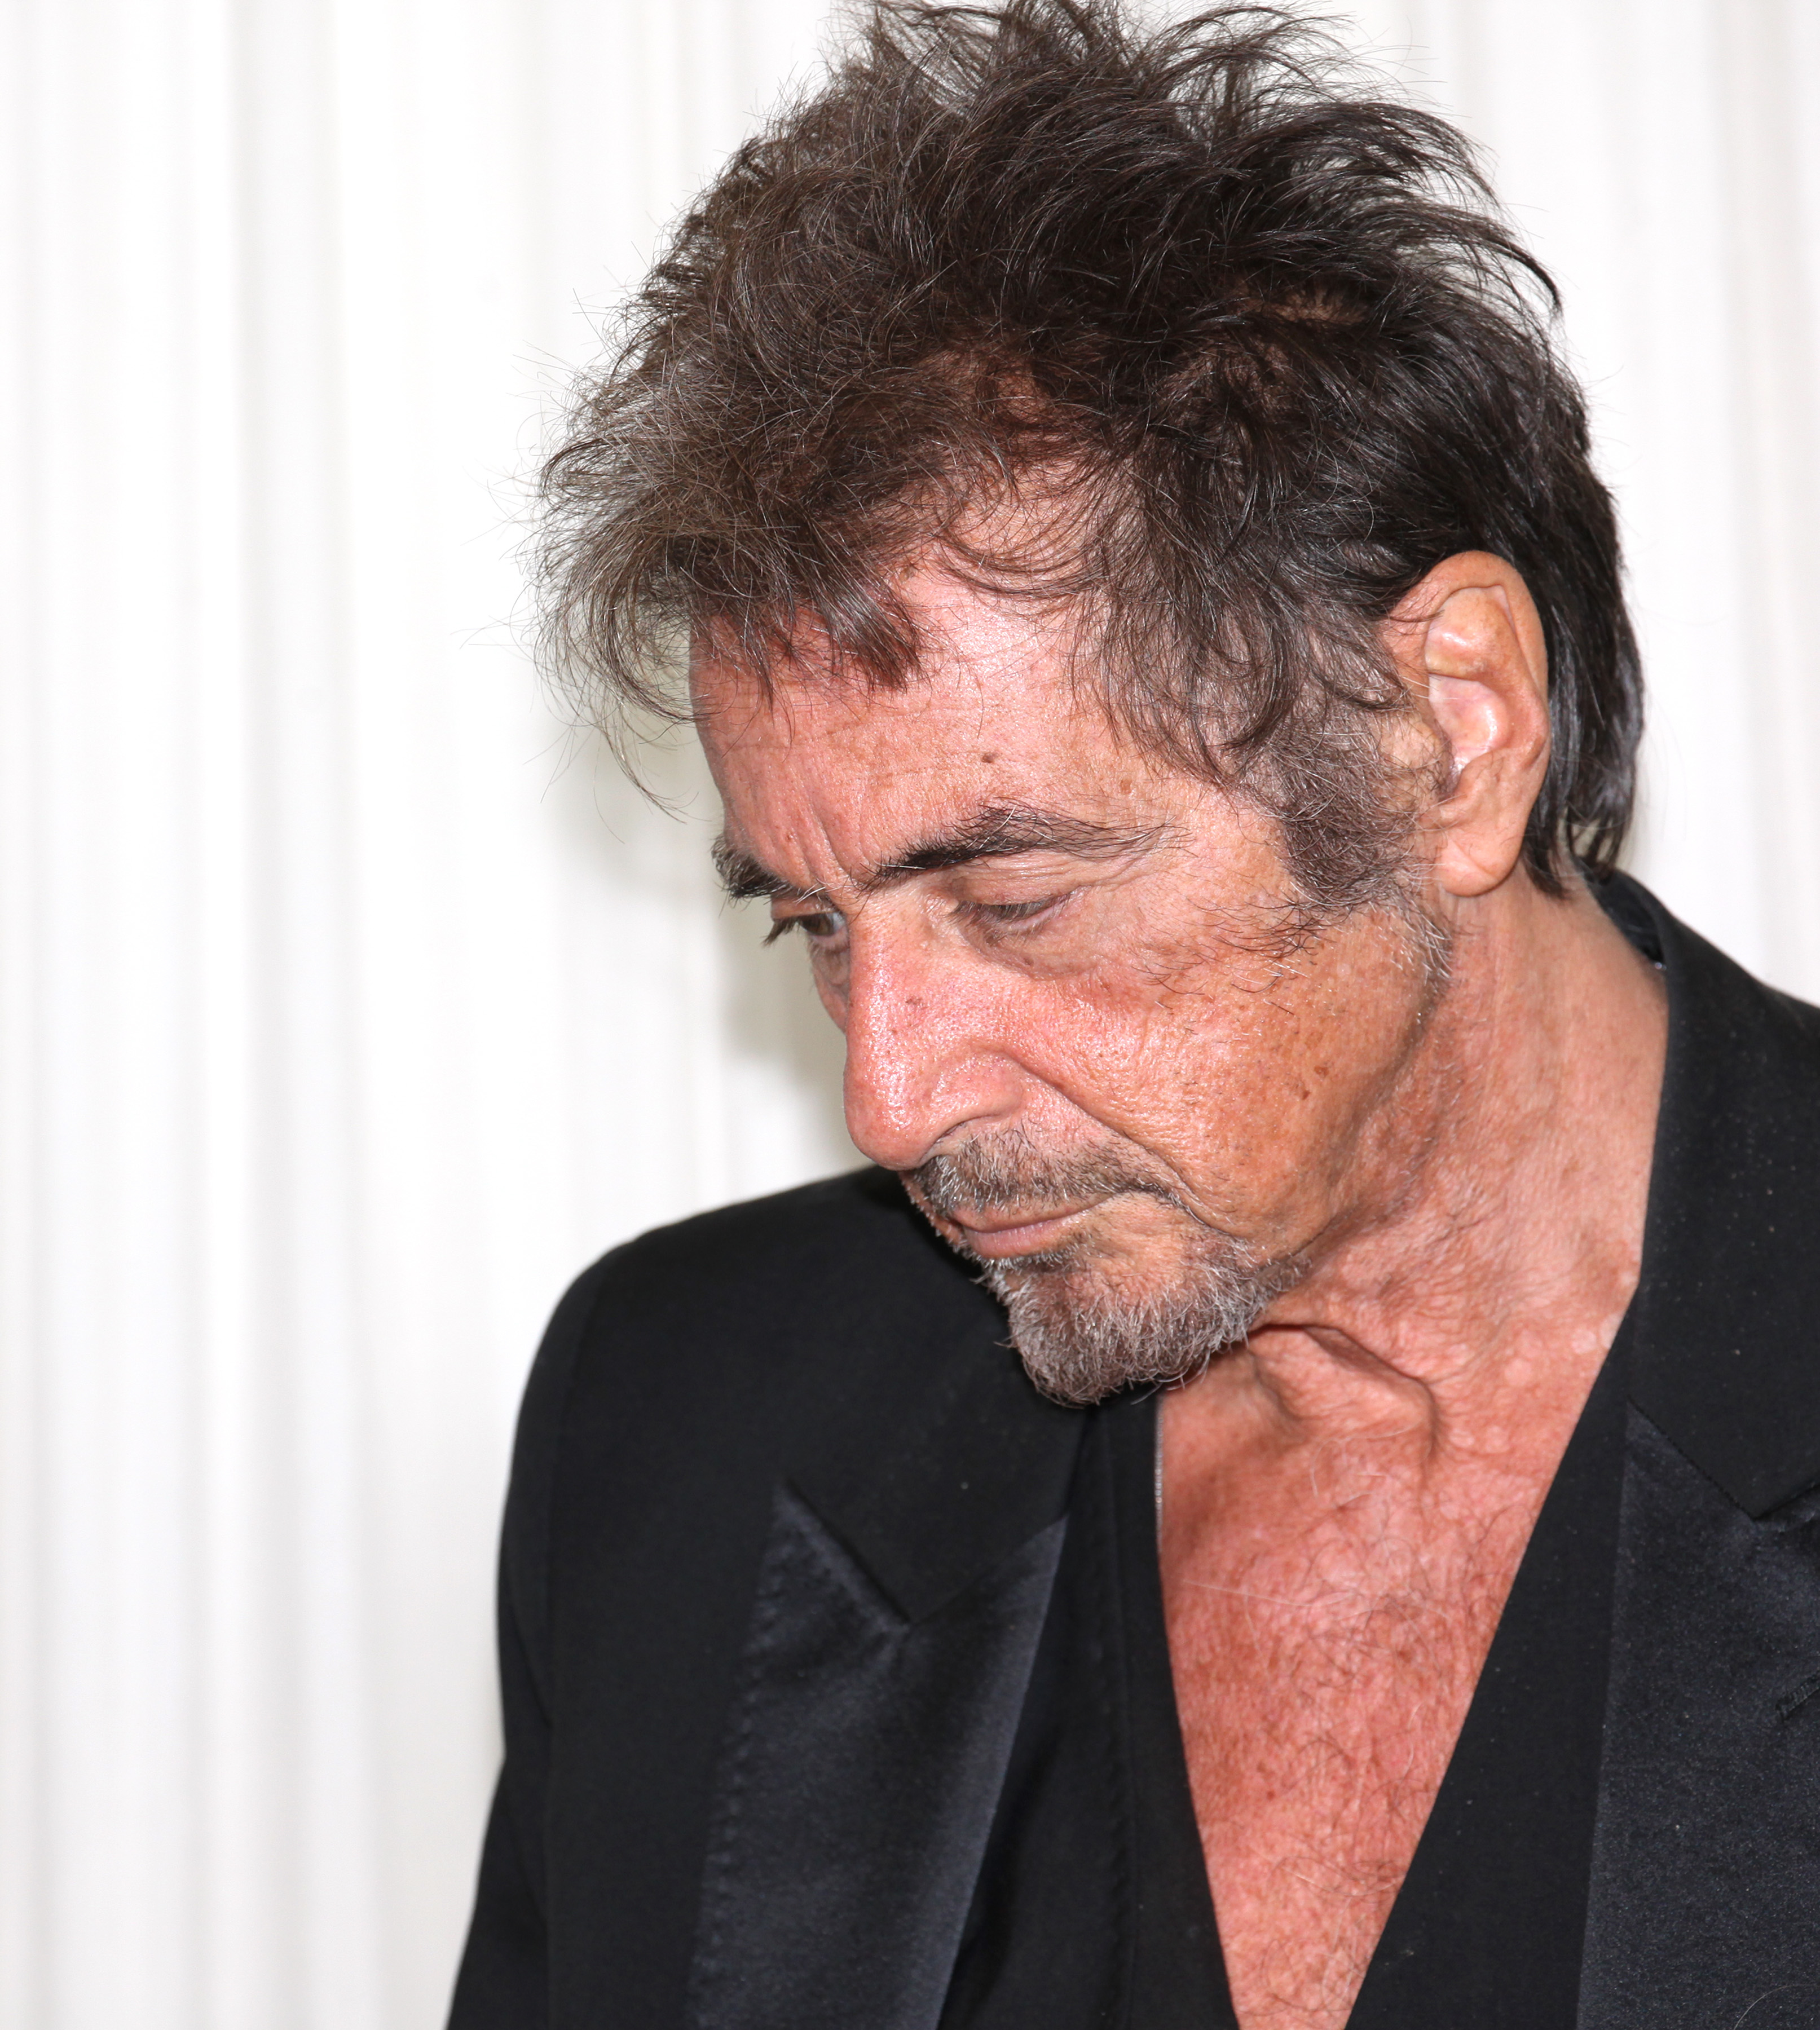 Al Pacino in New York City am 19. September 2012 | Quelle: Getty Images